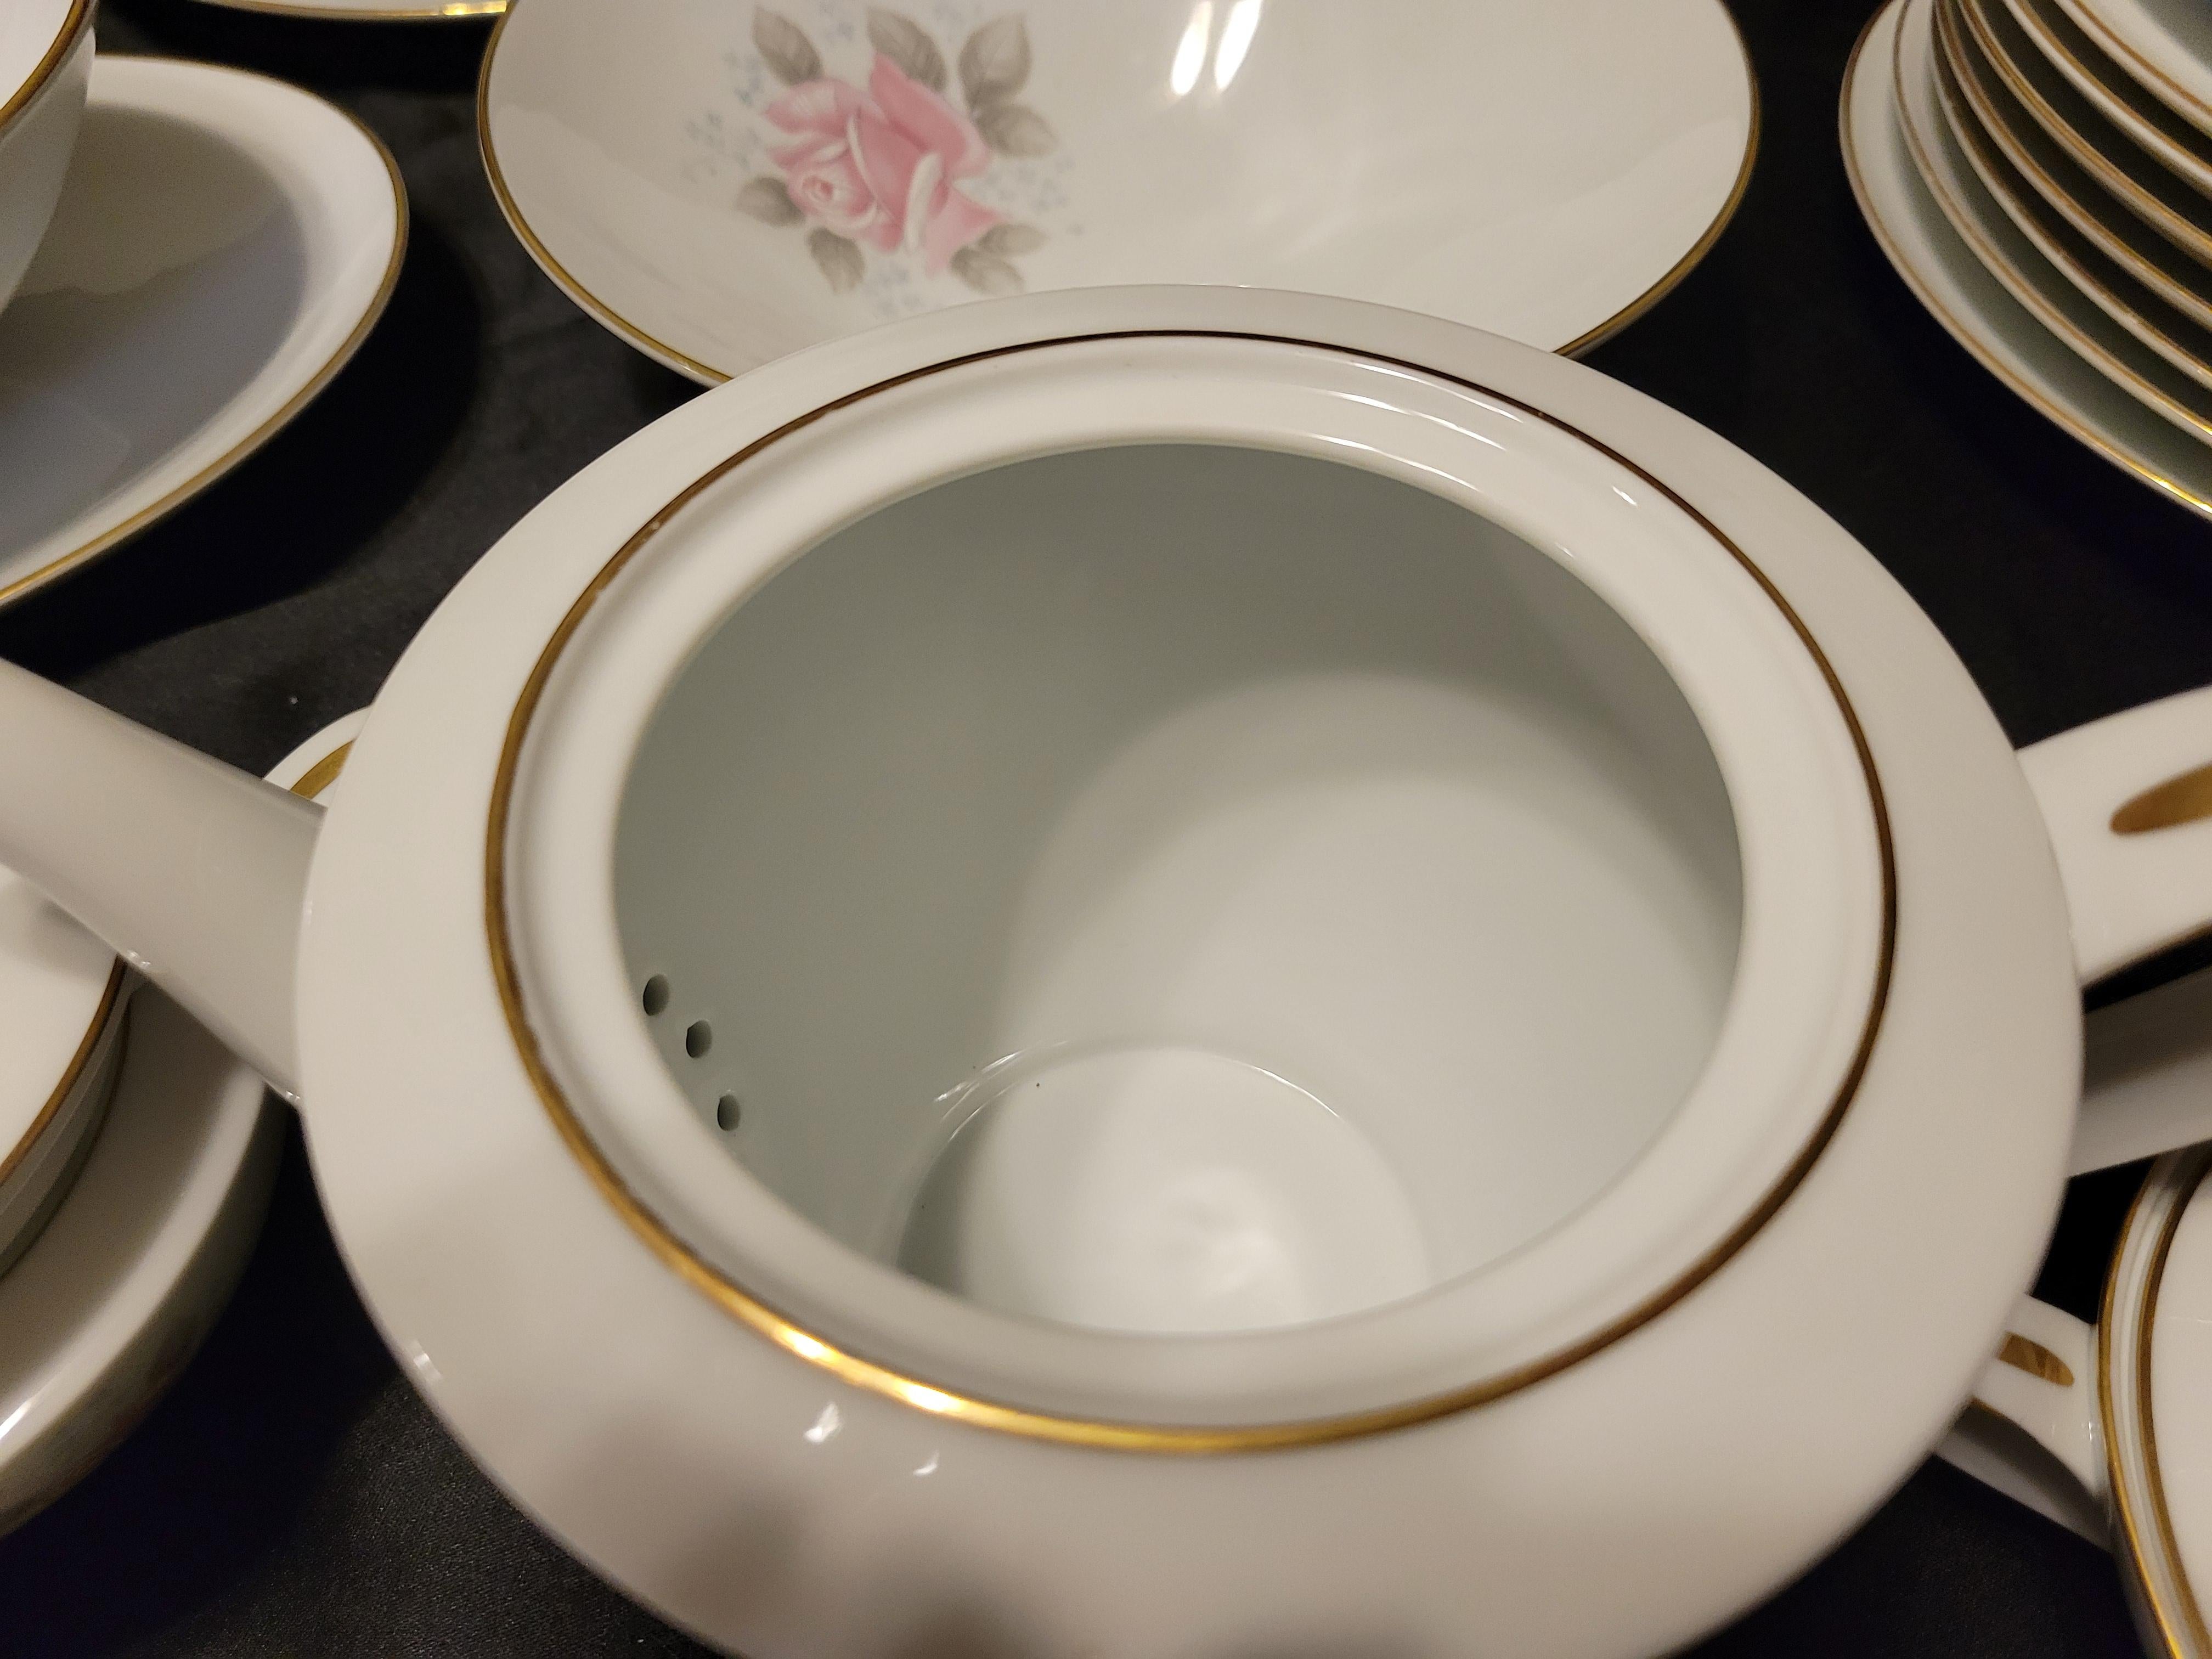 Vintage Noritake 'Roseville' Fine China Dining Set for 8 Persons - 79 Items For Sale 9